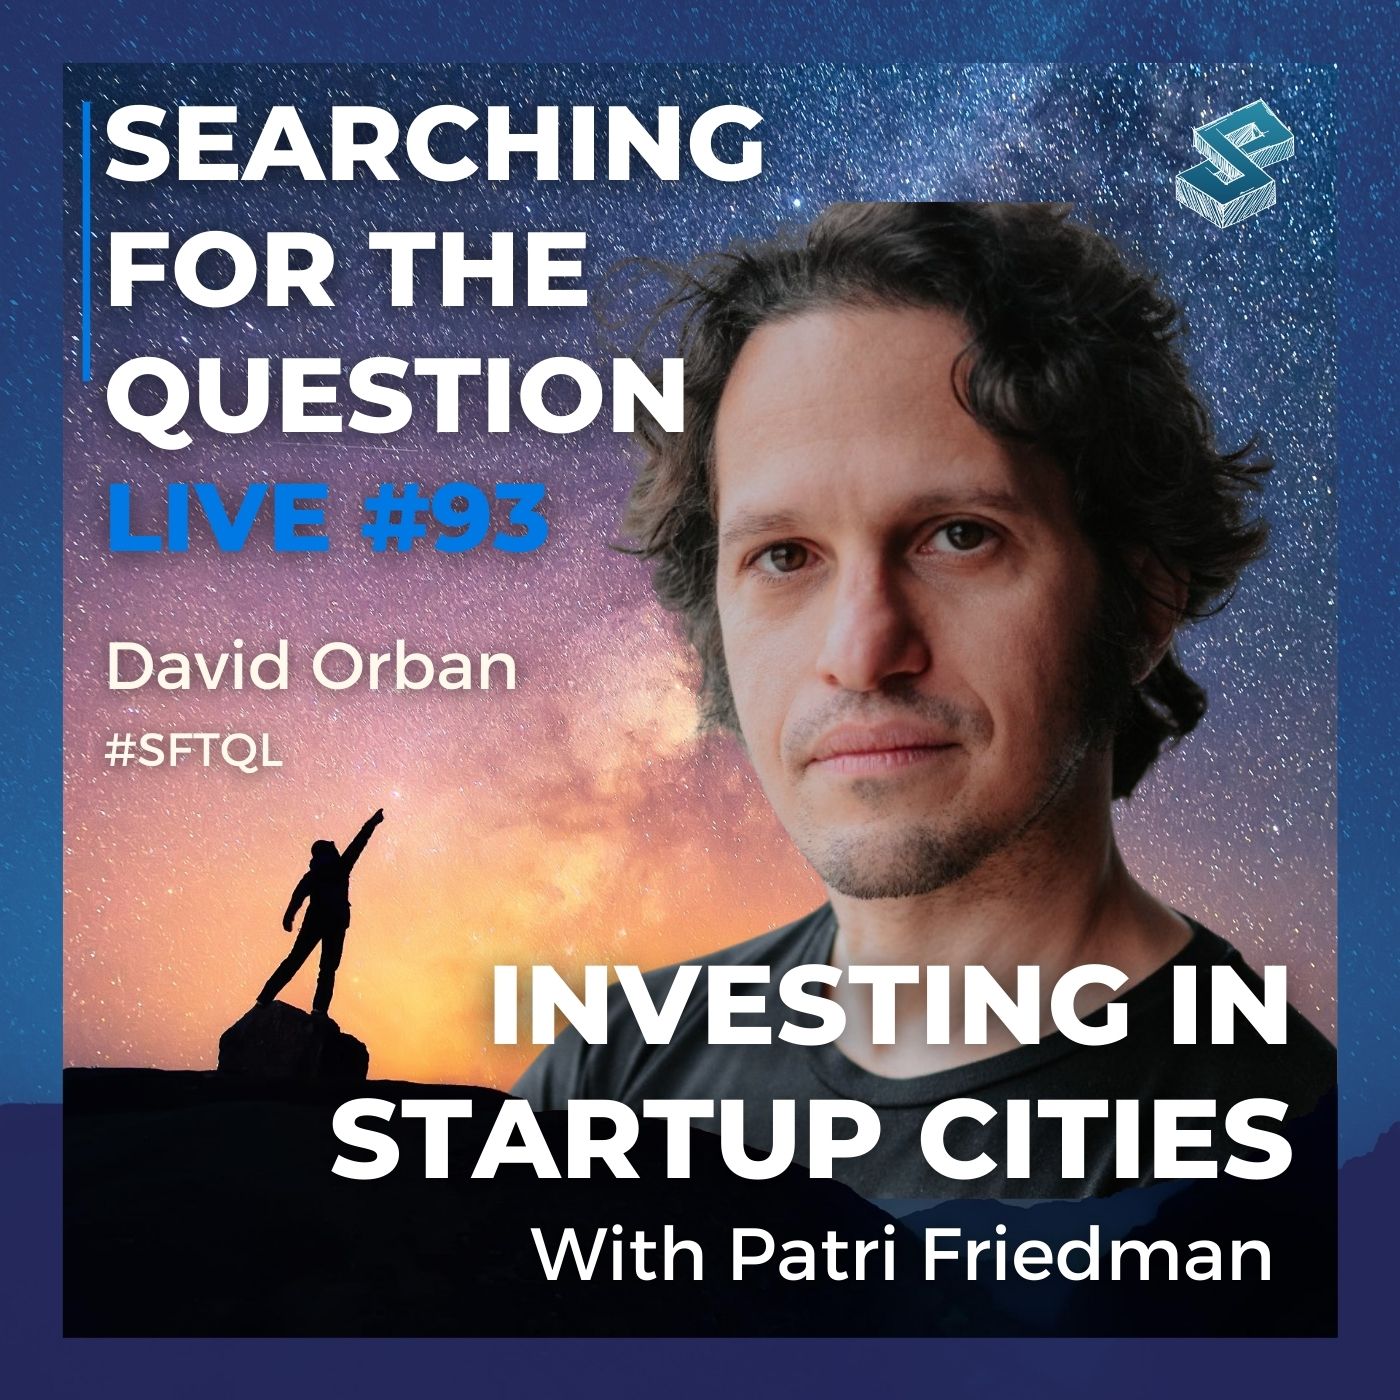 Investing in Startup Cities with Patri Friedman - Searching for the Question Live #93